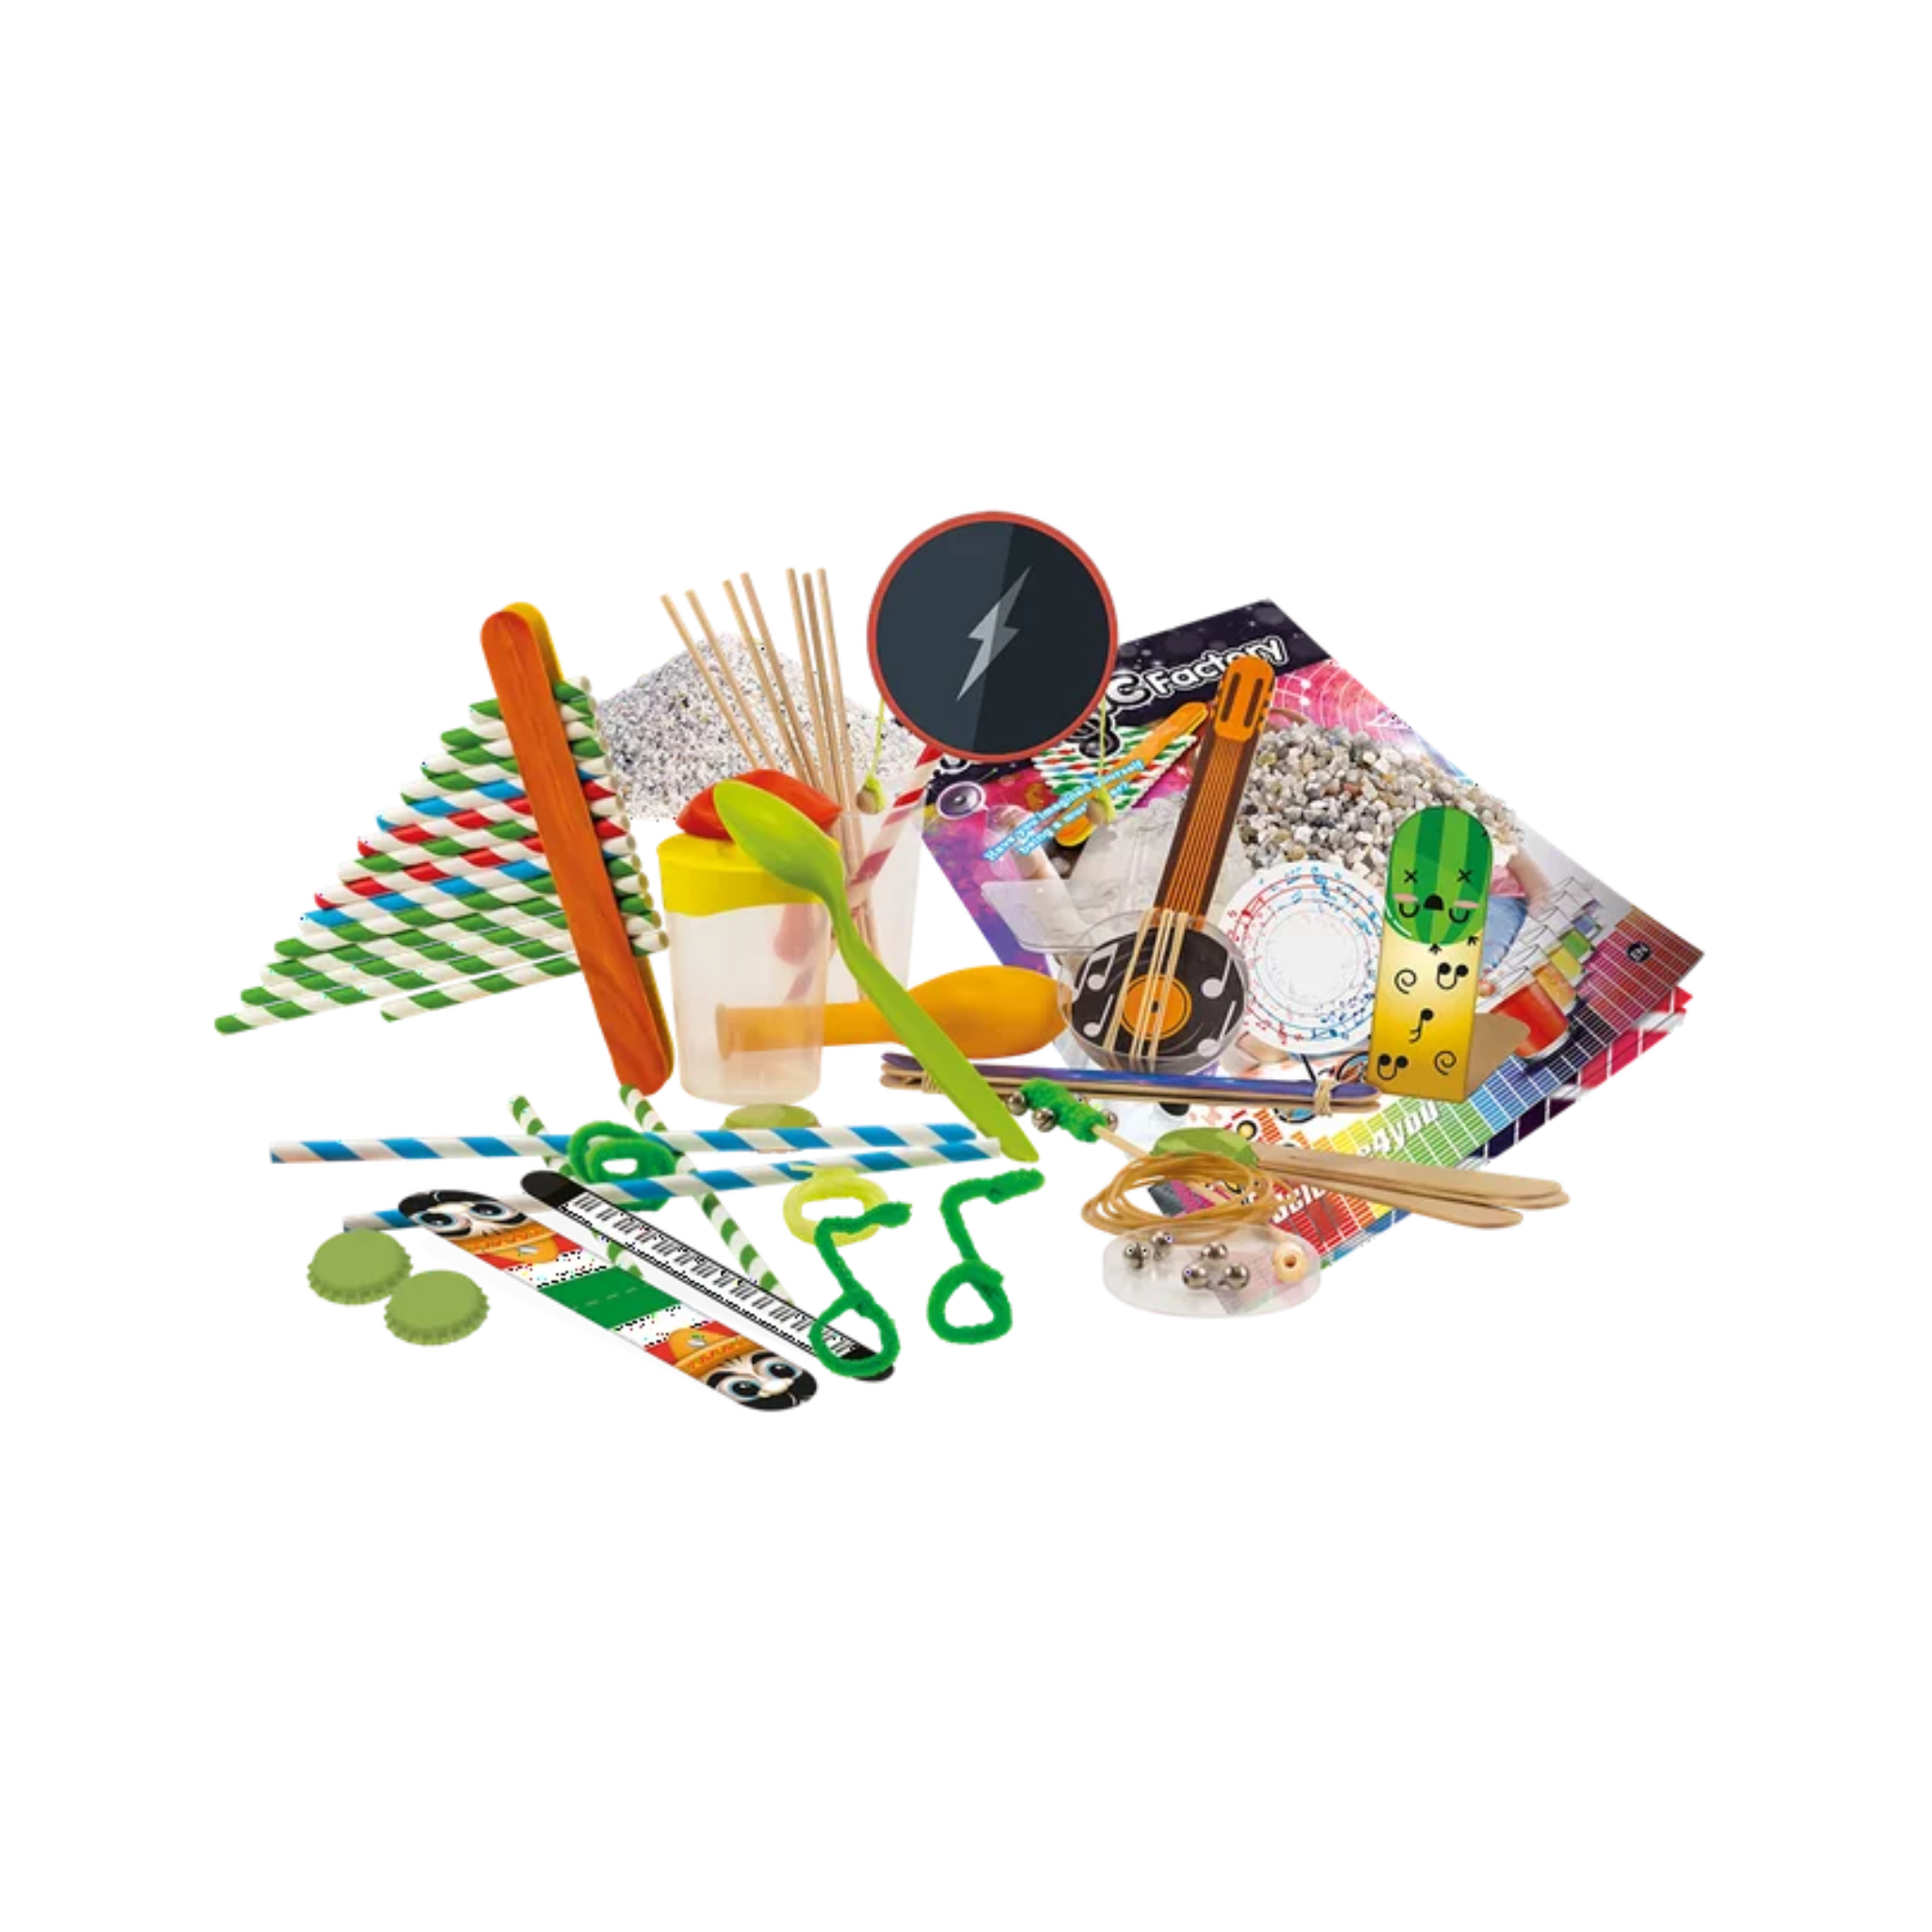 14-Experiment PlayMonster Music Factory Science Kit